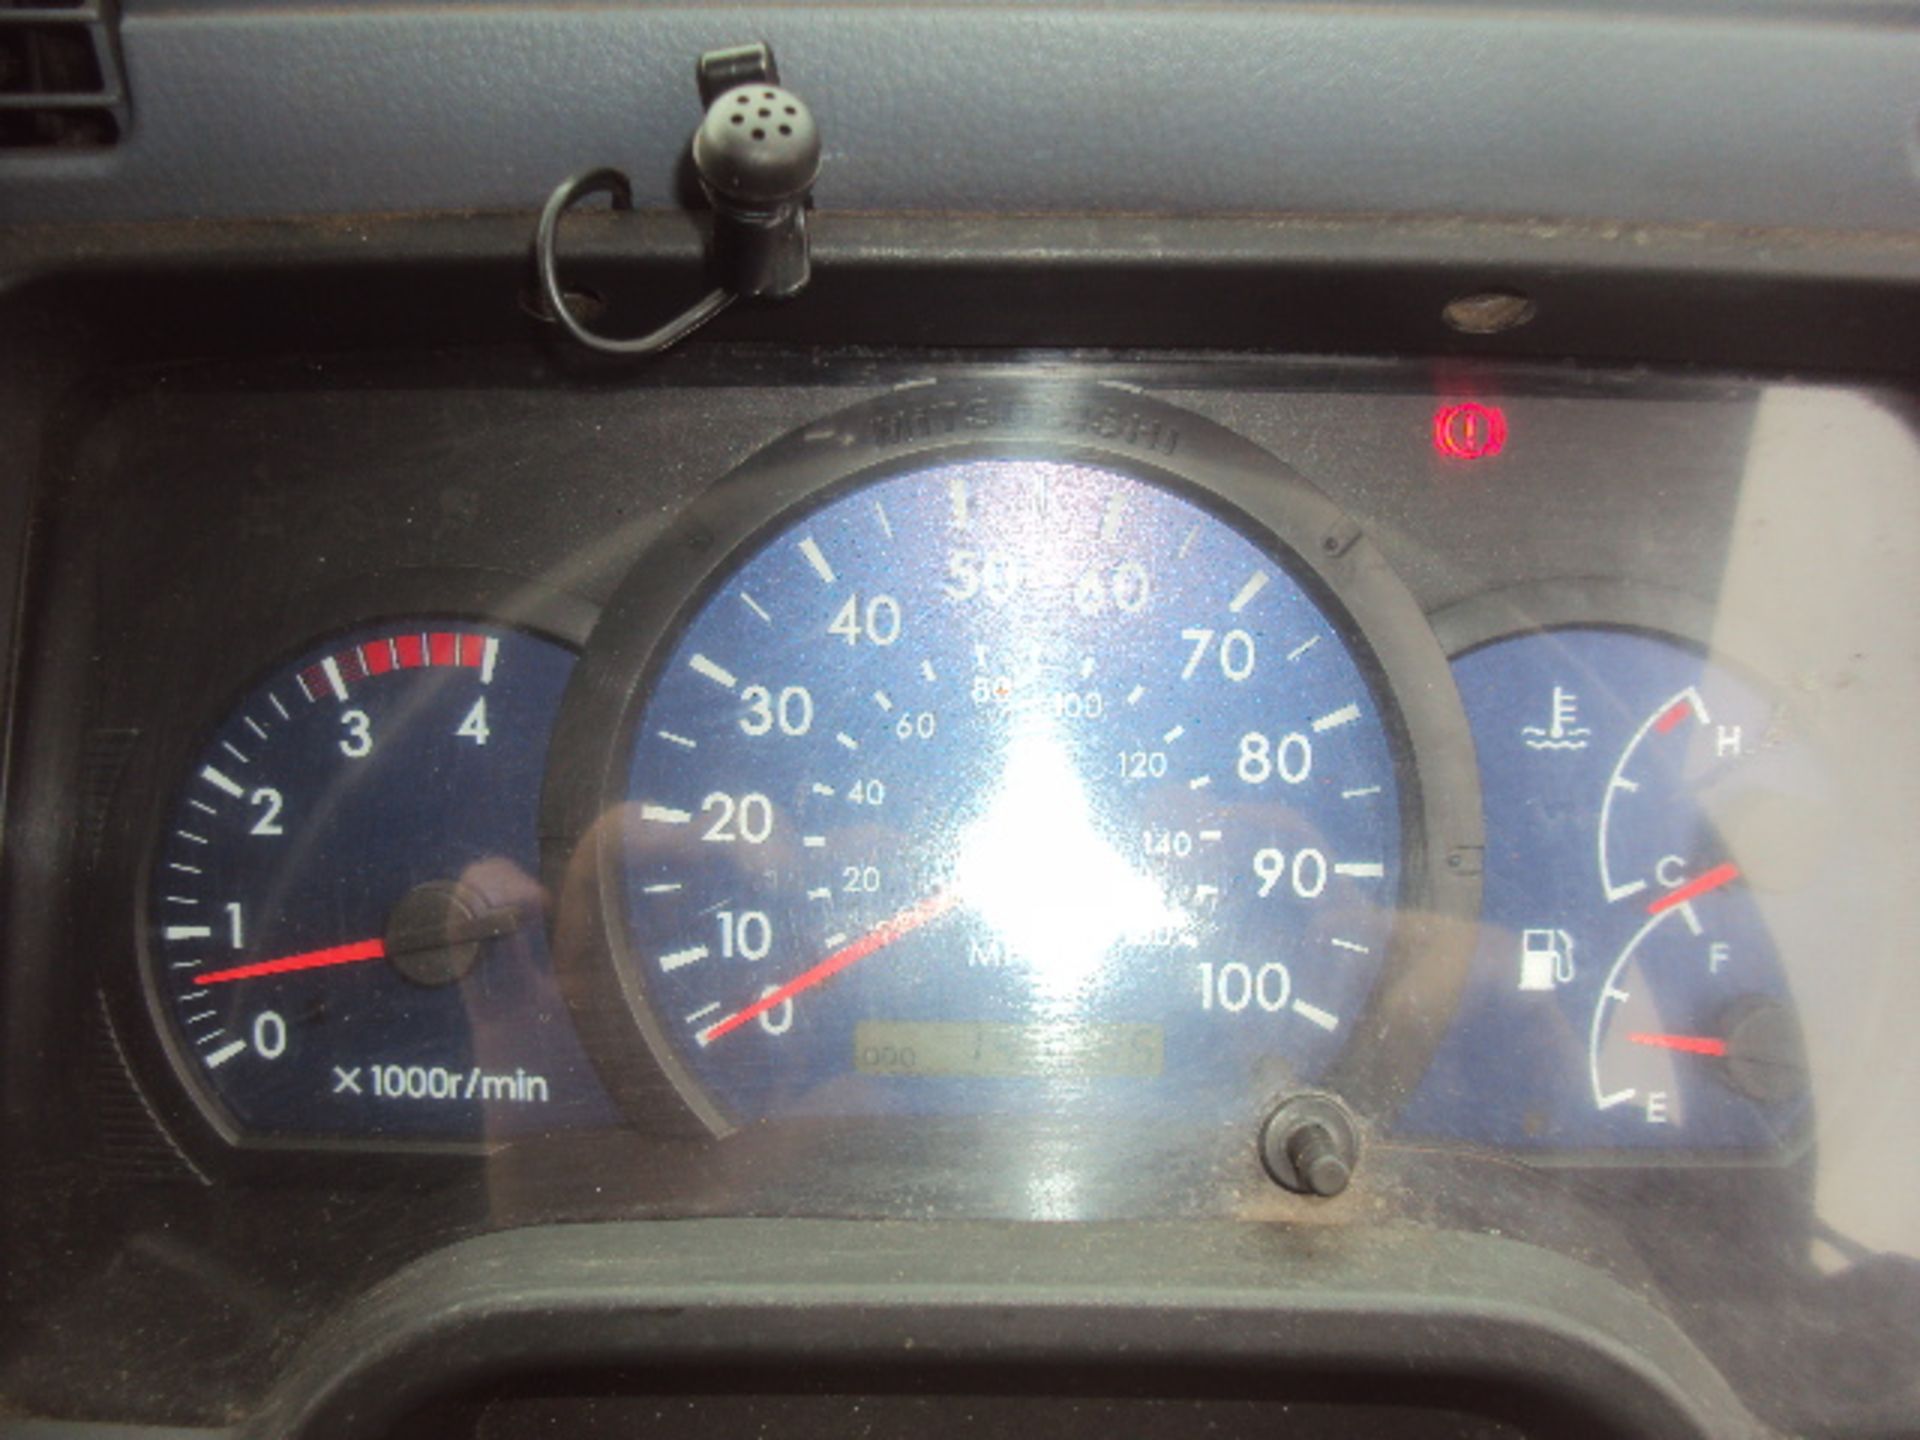 2008 MITSUBISHI FUSO Canter 8C18 7.5t drop side truck Reg: YJ08 BHN( 147,000 recorded miles)(R+D) - Image 7 of 7